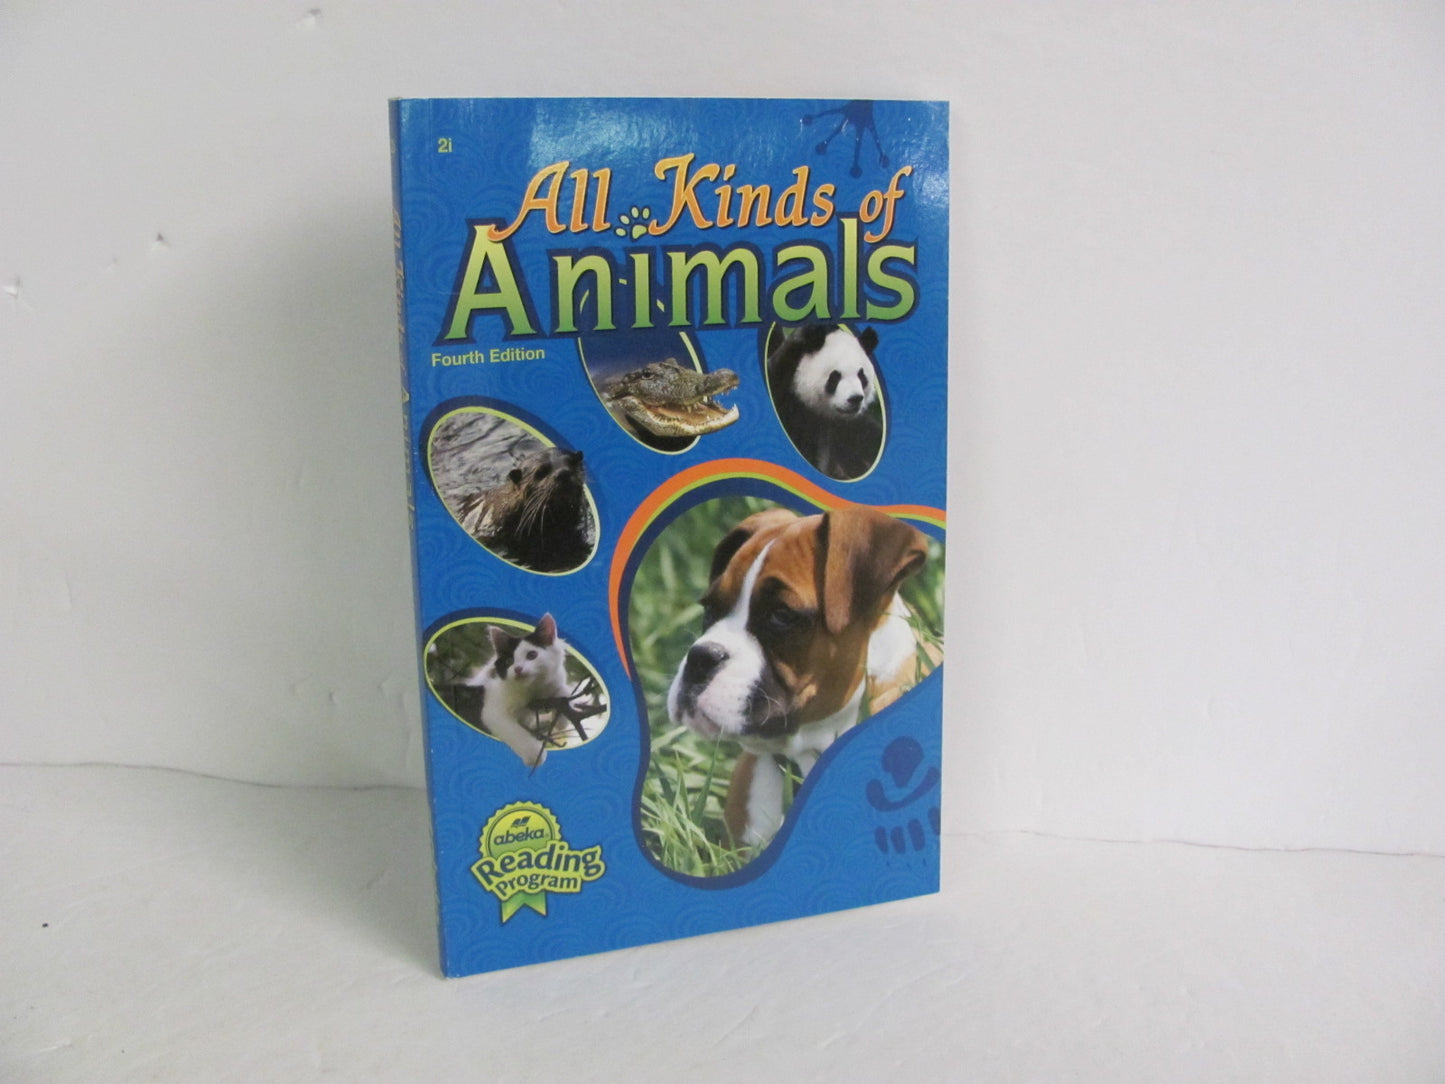 All Kinds of Animals Abeka Student Book Pre-Owned 2nd Grade Reading Textbooks